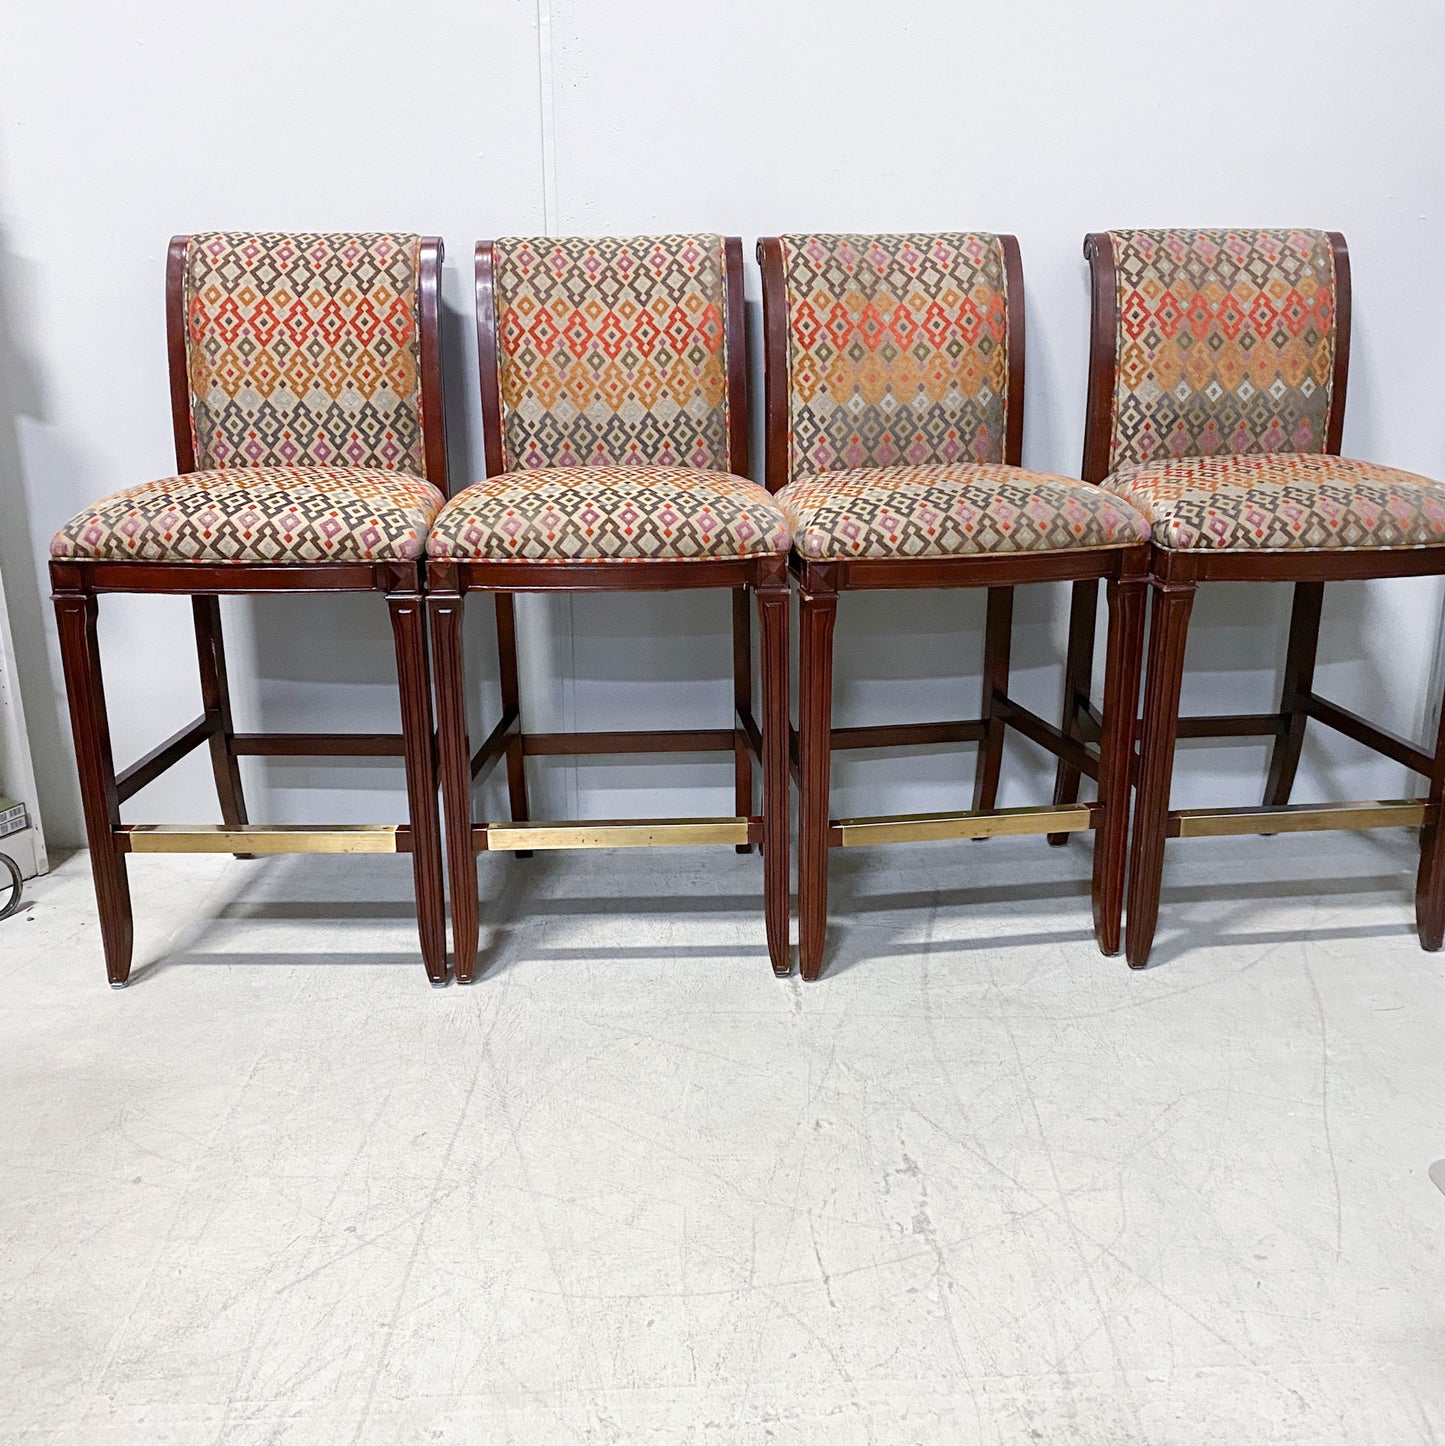 Upholstered Counter-Height Dining Chairs (Set of 4)